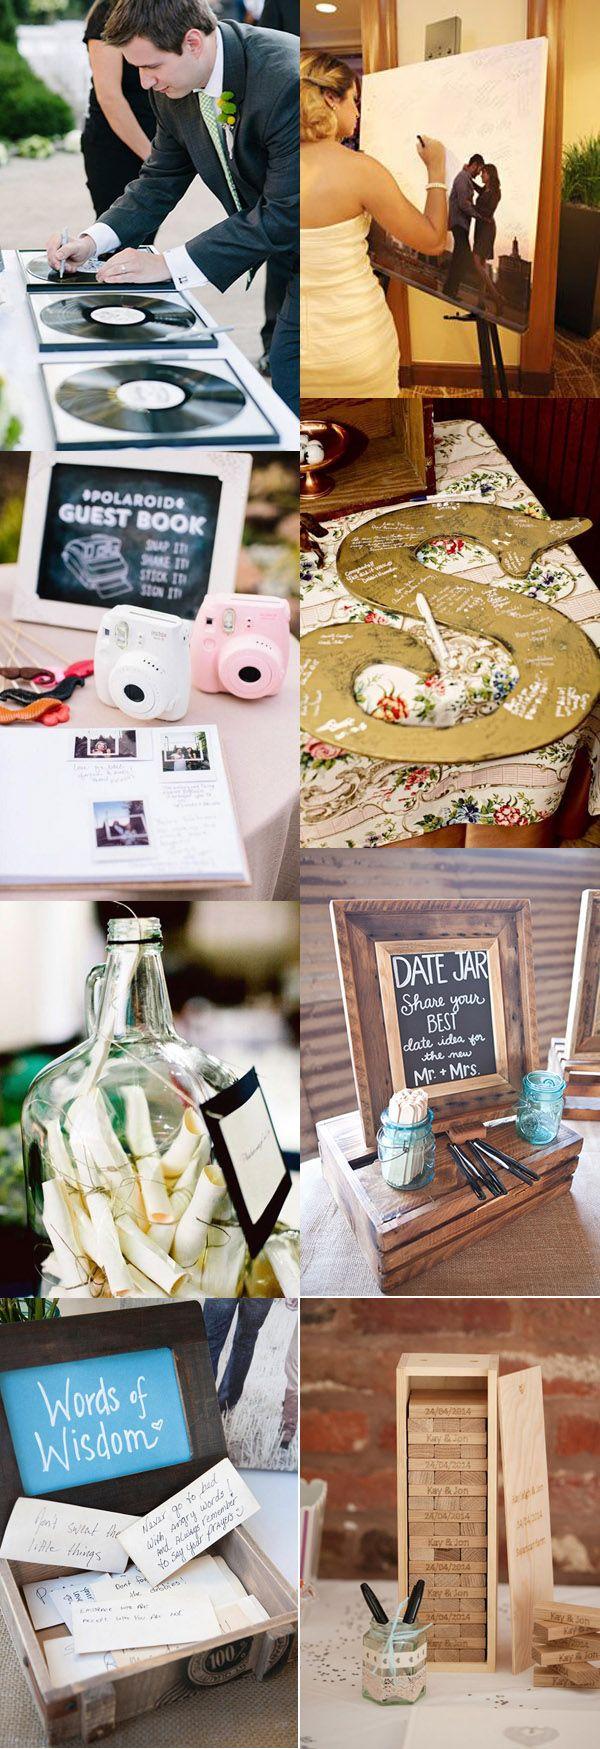 Wedding - 23 Unique Wedding Guest Book Ideas For Your Big Day